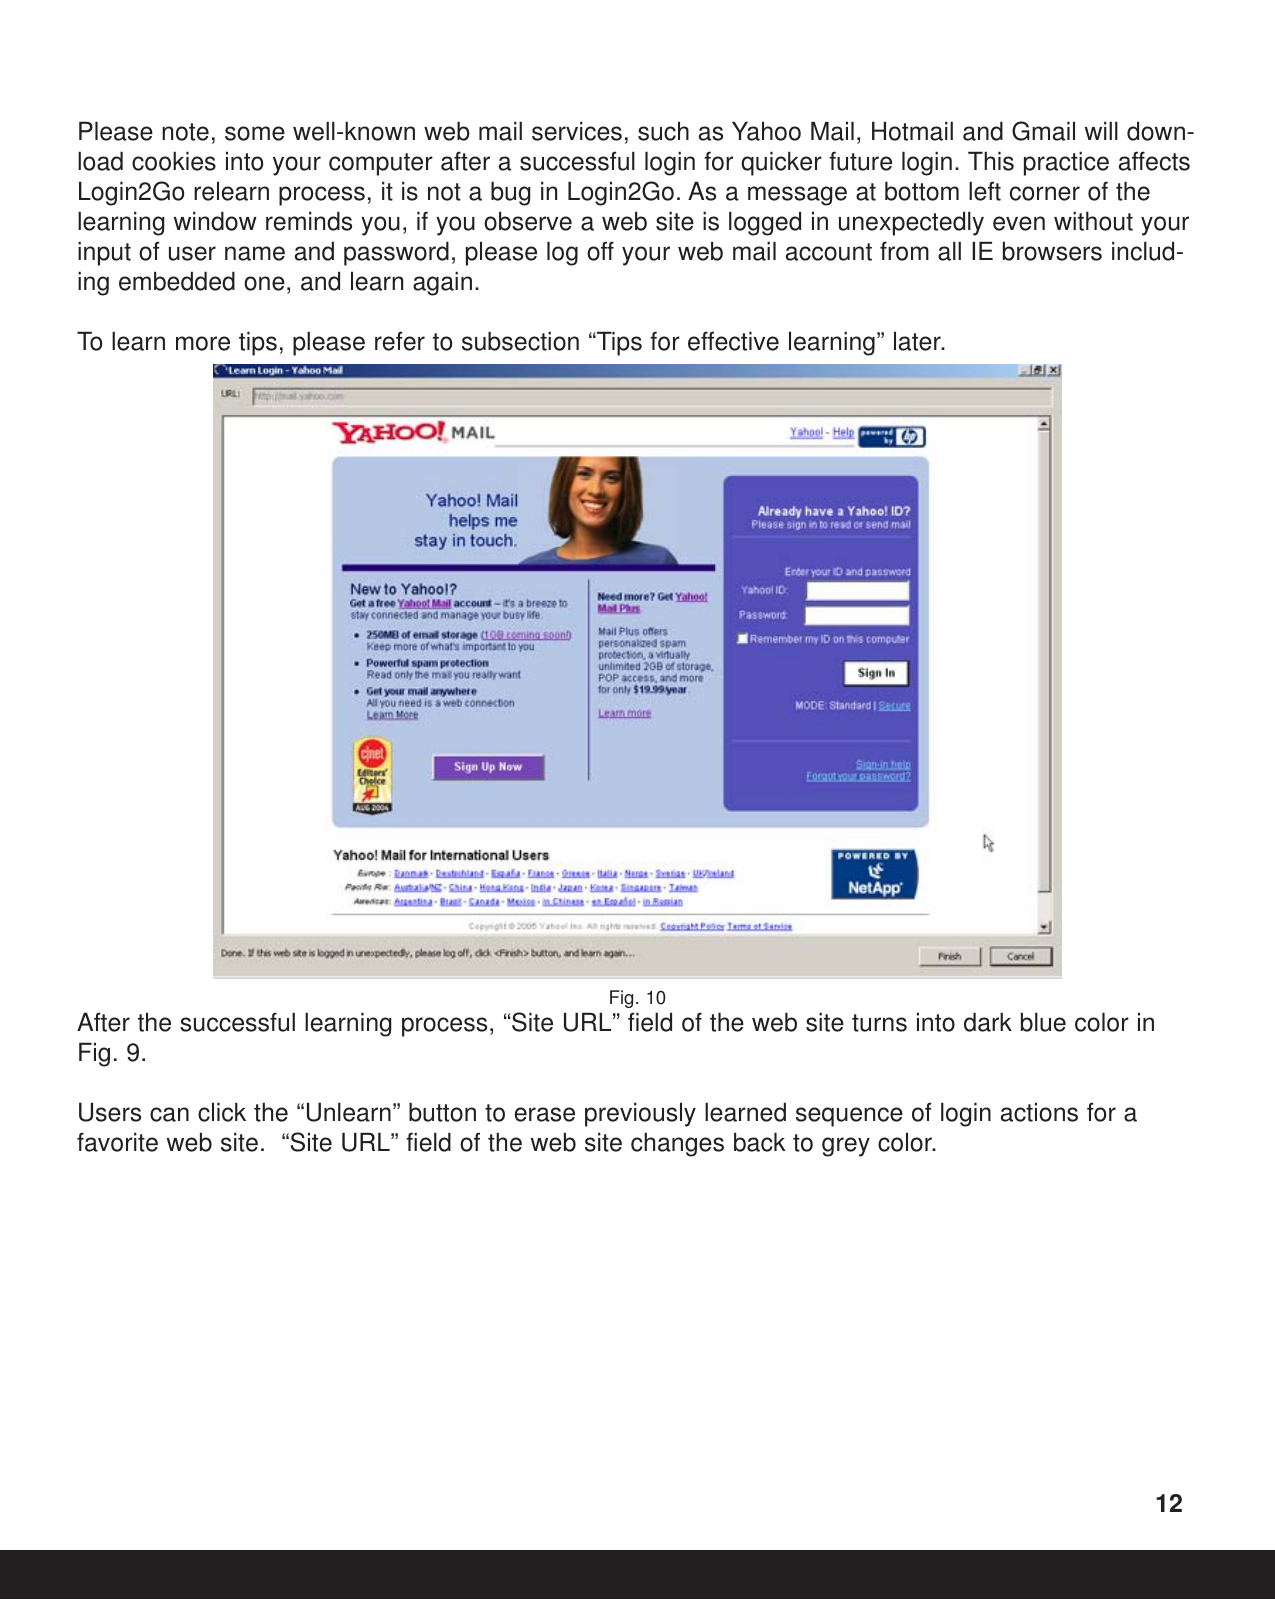 Please note, some well-known web mail services, such as Yahoo Mail, Hotmail and Gmail will down-load cookies into your computer after a successful login for quicker future login. This practice affectsLogin2Go relearn process, it is not a bug in Login2Go. As a message at bottom left corner of thelearning window reminds you, if you observe a web site is logged in unexpectedly even without yourinput of user name and password, please log off your web mail account from all IE browsers includ-ing embedded one, and learn again. To  learn more tips, please refer to subsection “Tips for effective learning” later.Fig. 10After the successful learning process, “Site URL” field of the web site turns into dark blue color inFig. 9.  Users can click the “Unlearn” button to erase previously learned sequence of login actions for afavorite web site.  “Site URL” field of the web site changes back to grey color.12